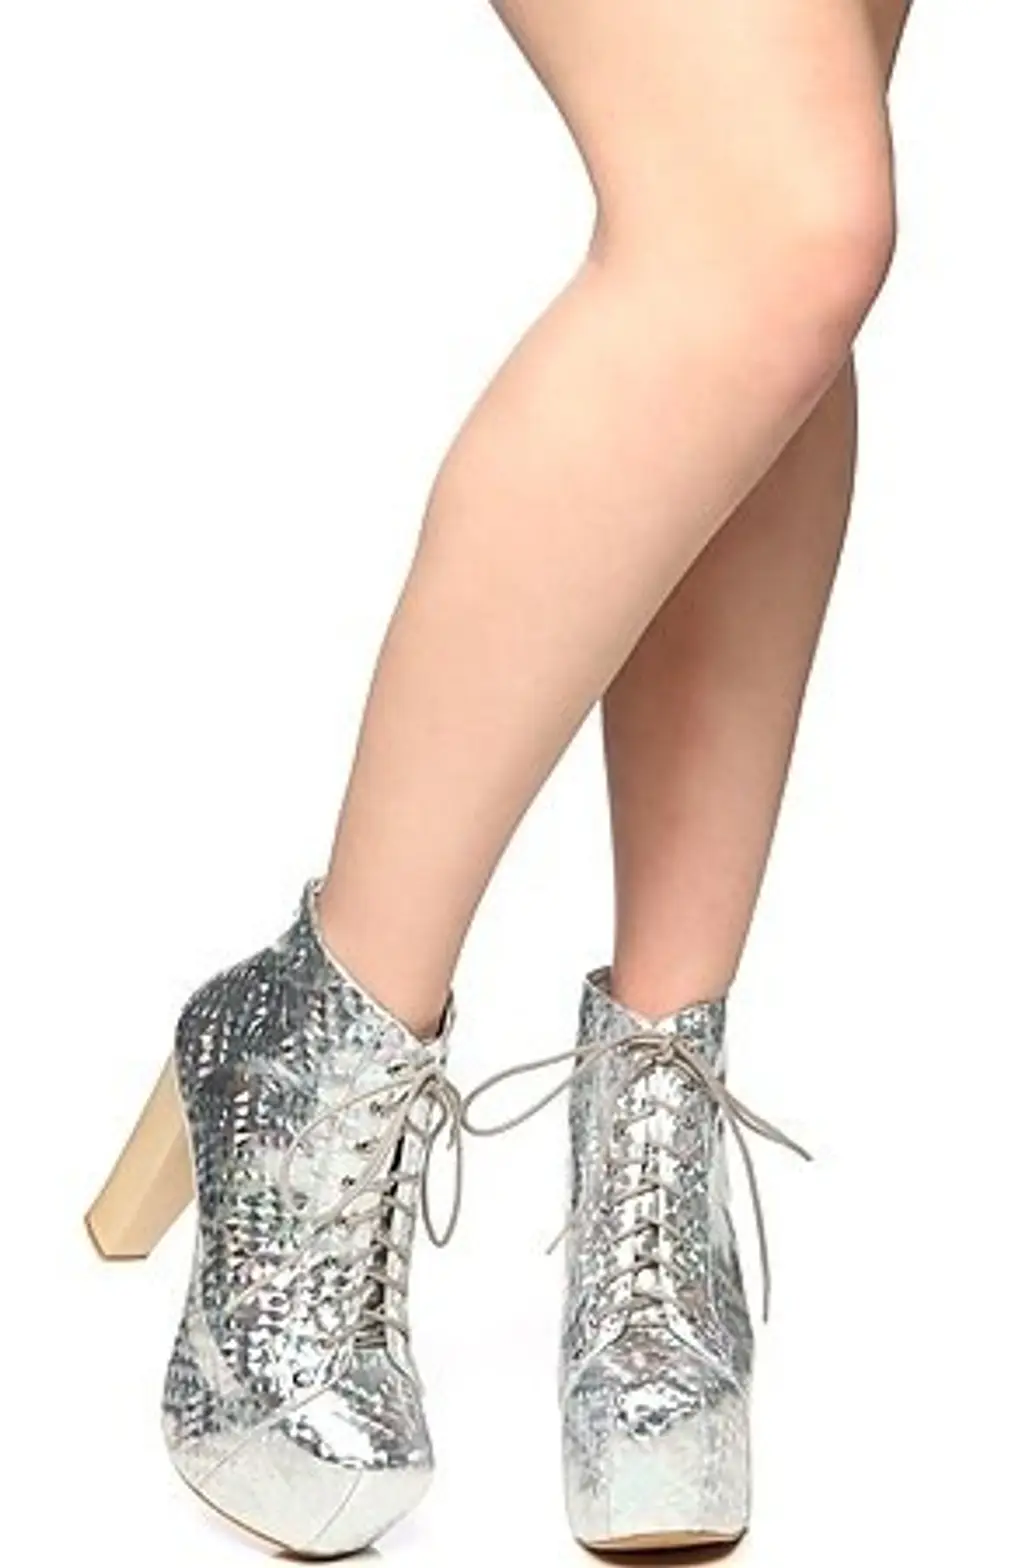 Jeffrey Campbell – the Lita Hologram Shoe in Silver